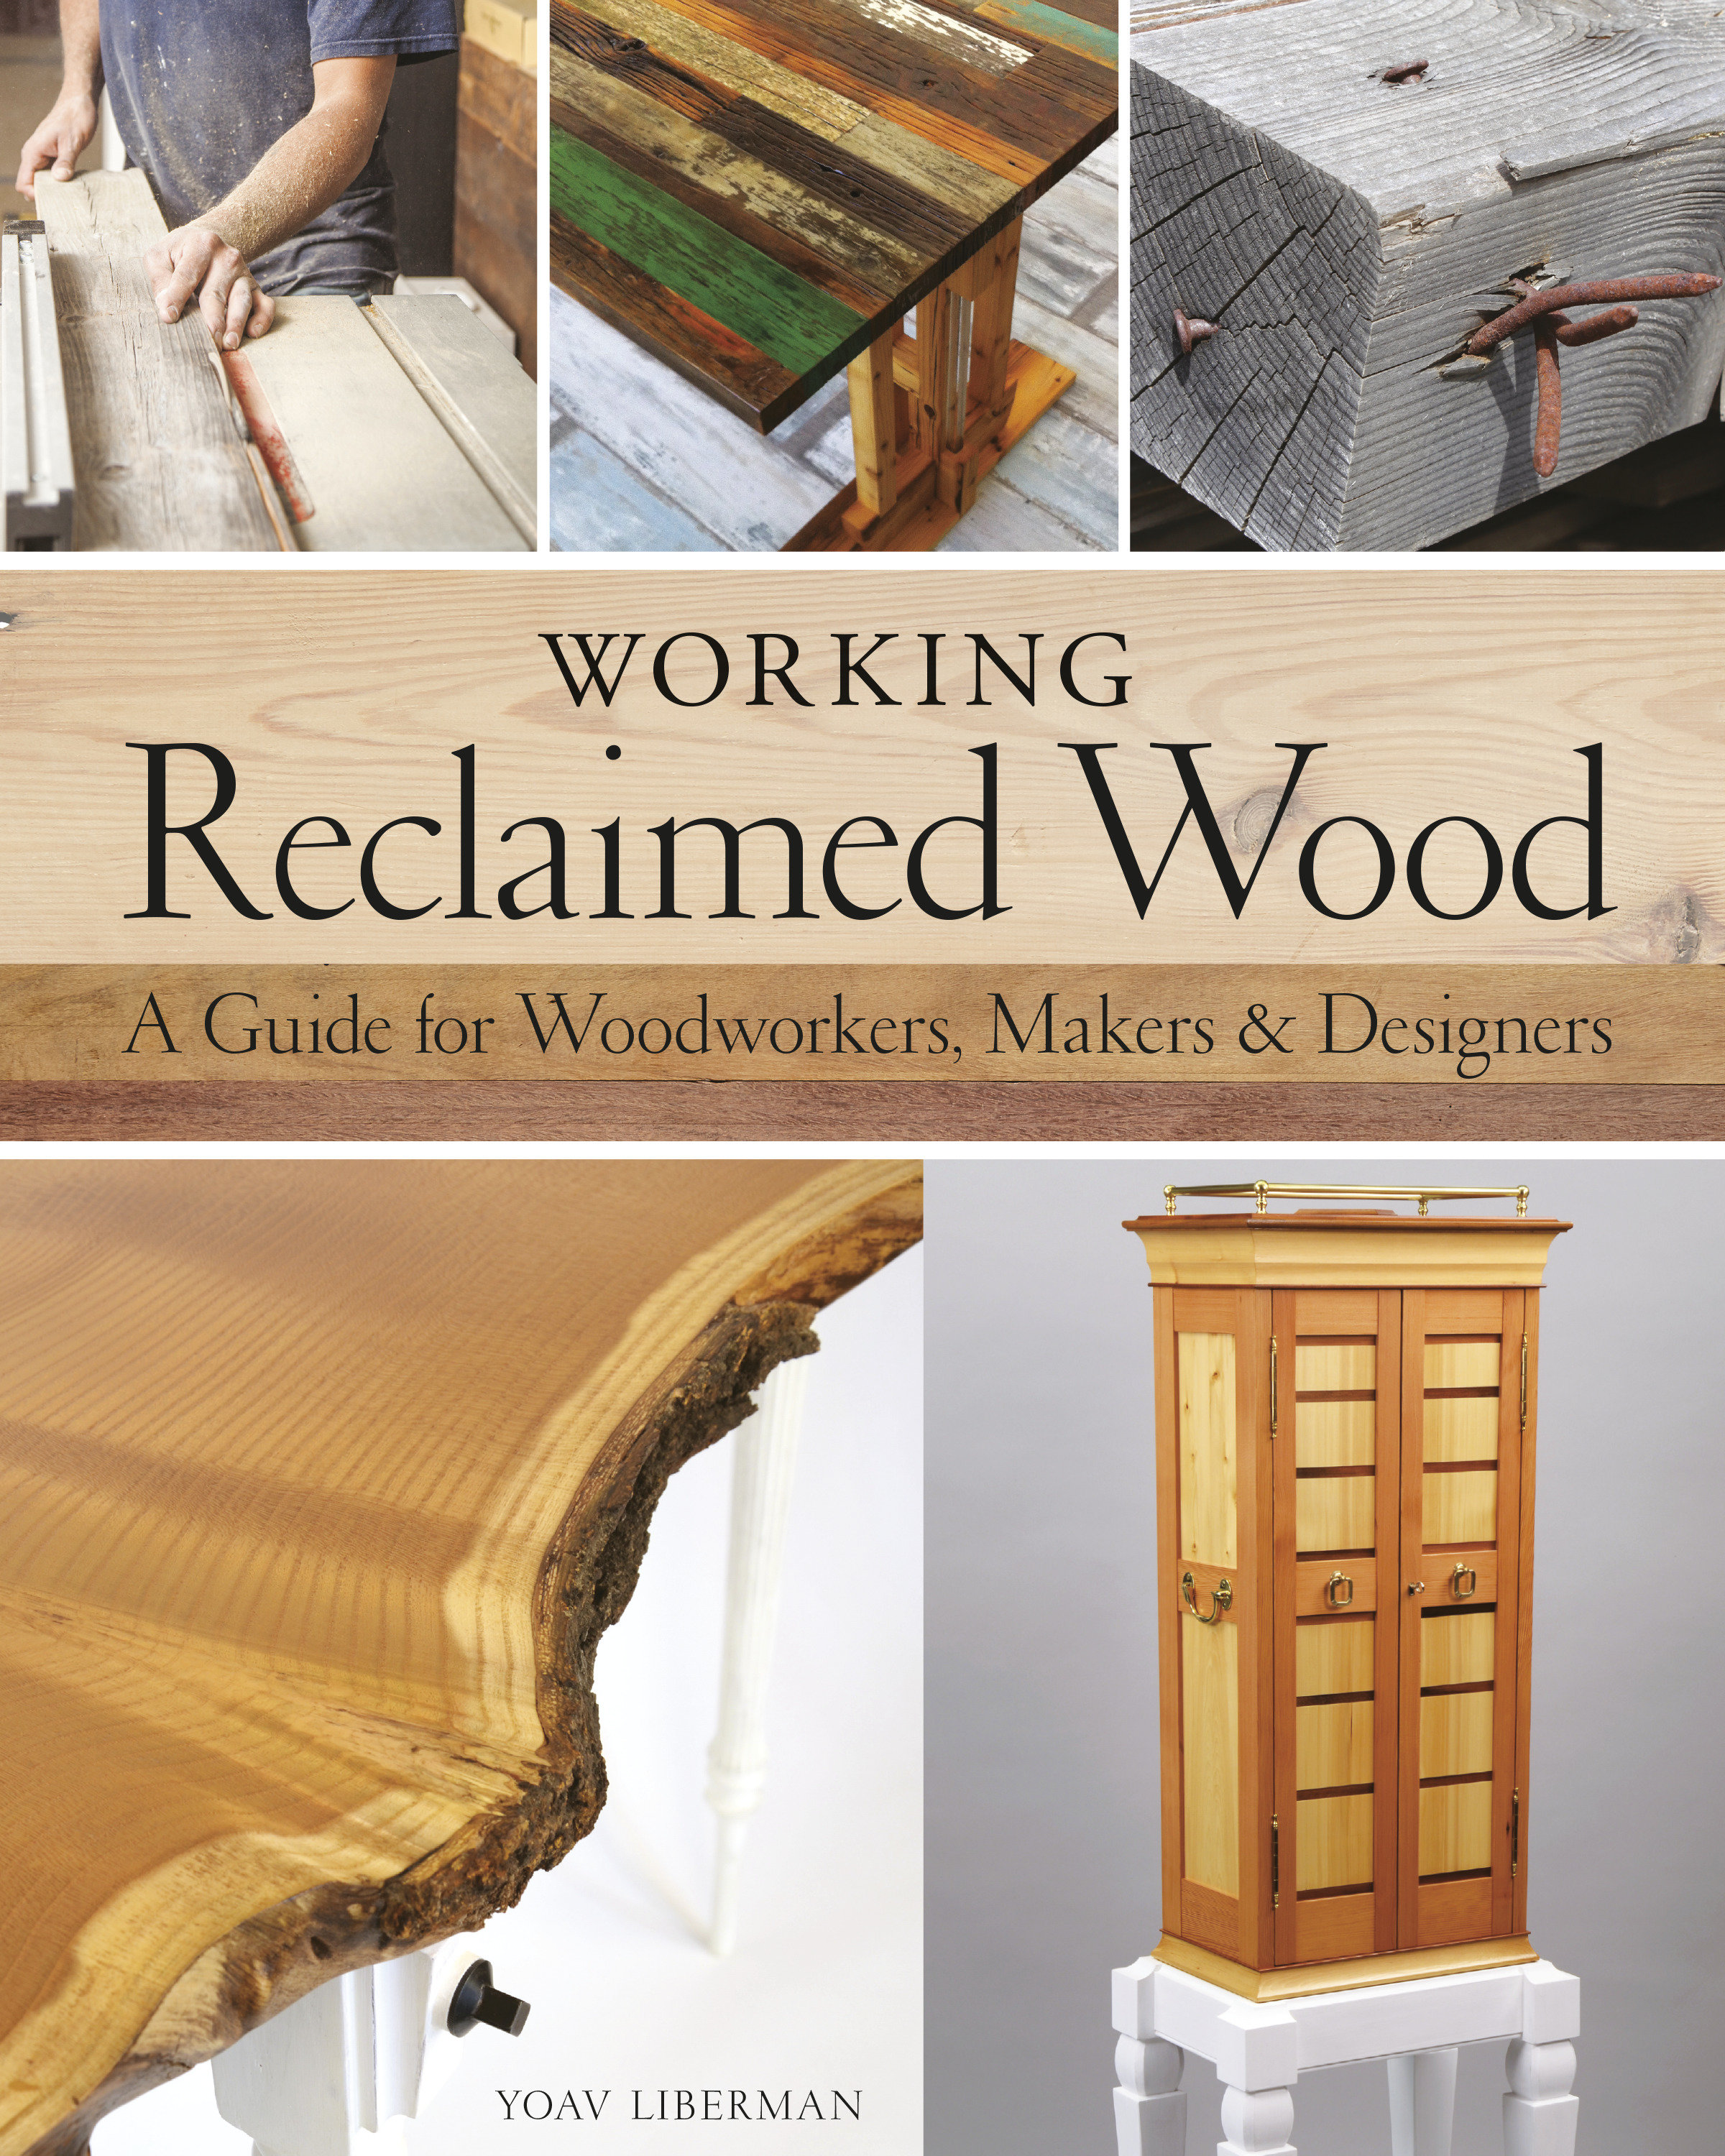 Working Reclaimed Wood (Hardcover Book)